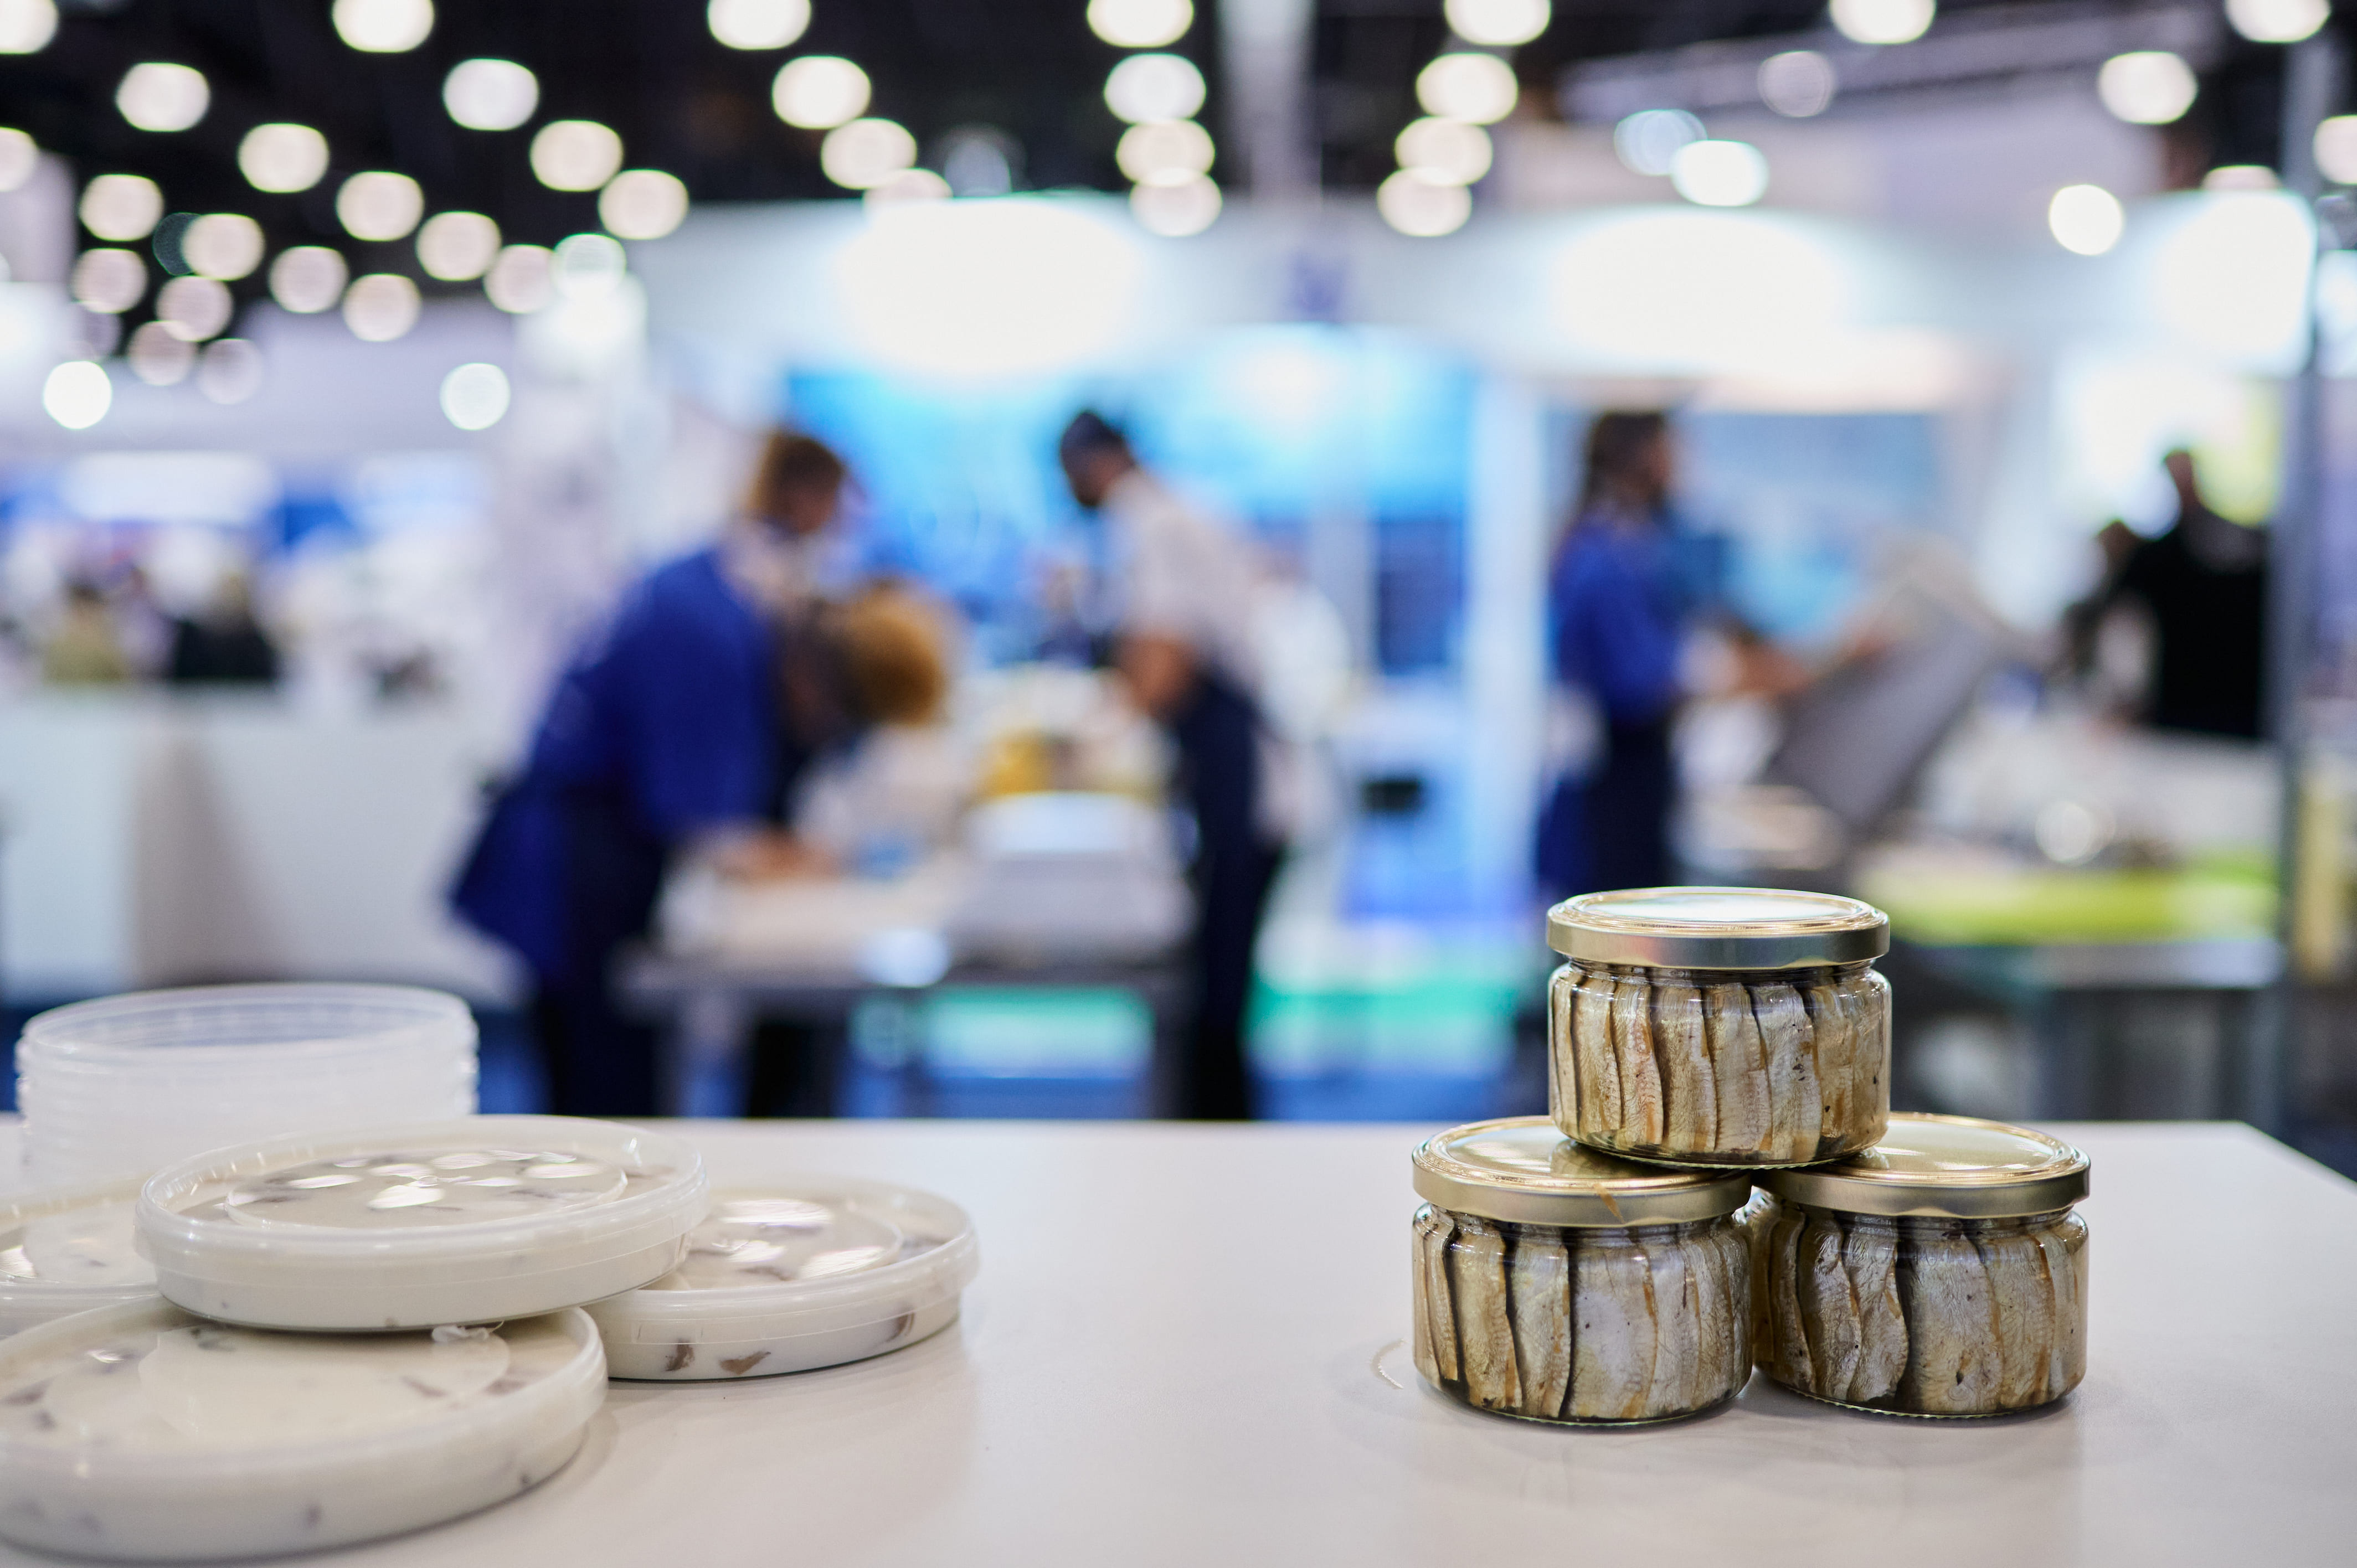 Canned fish is in the focus of Seafood Expo Russia